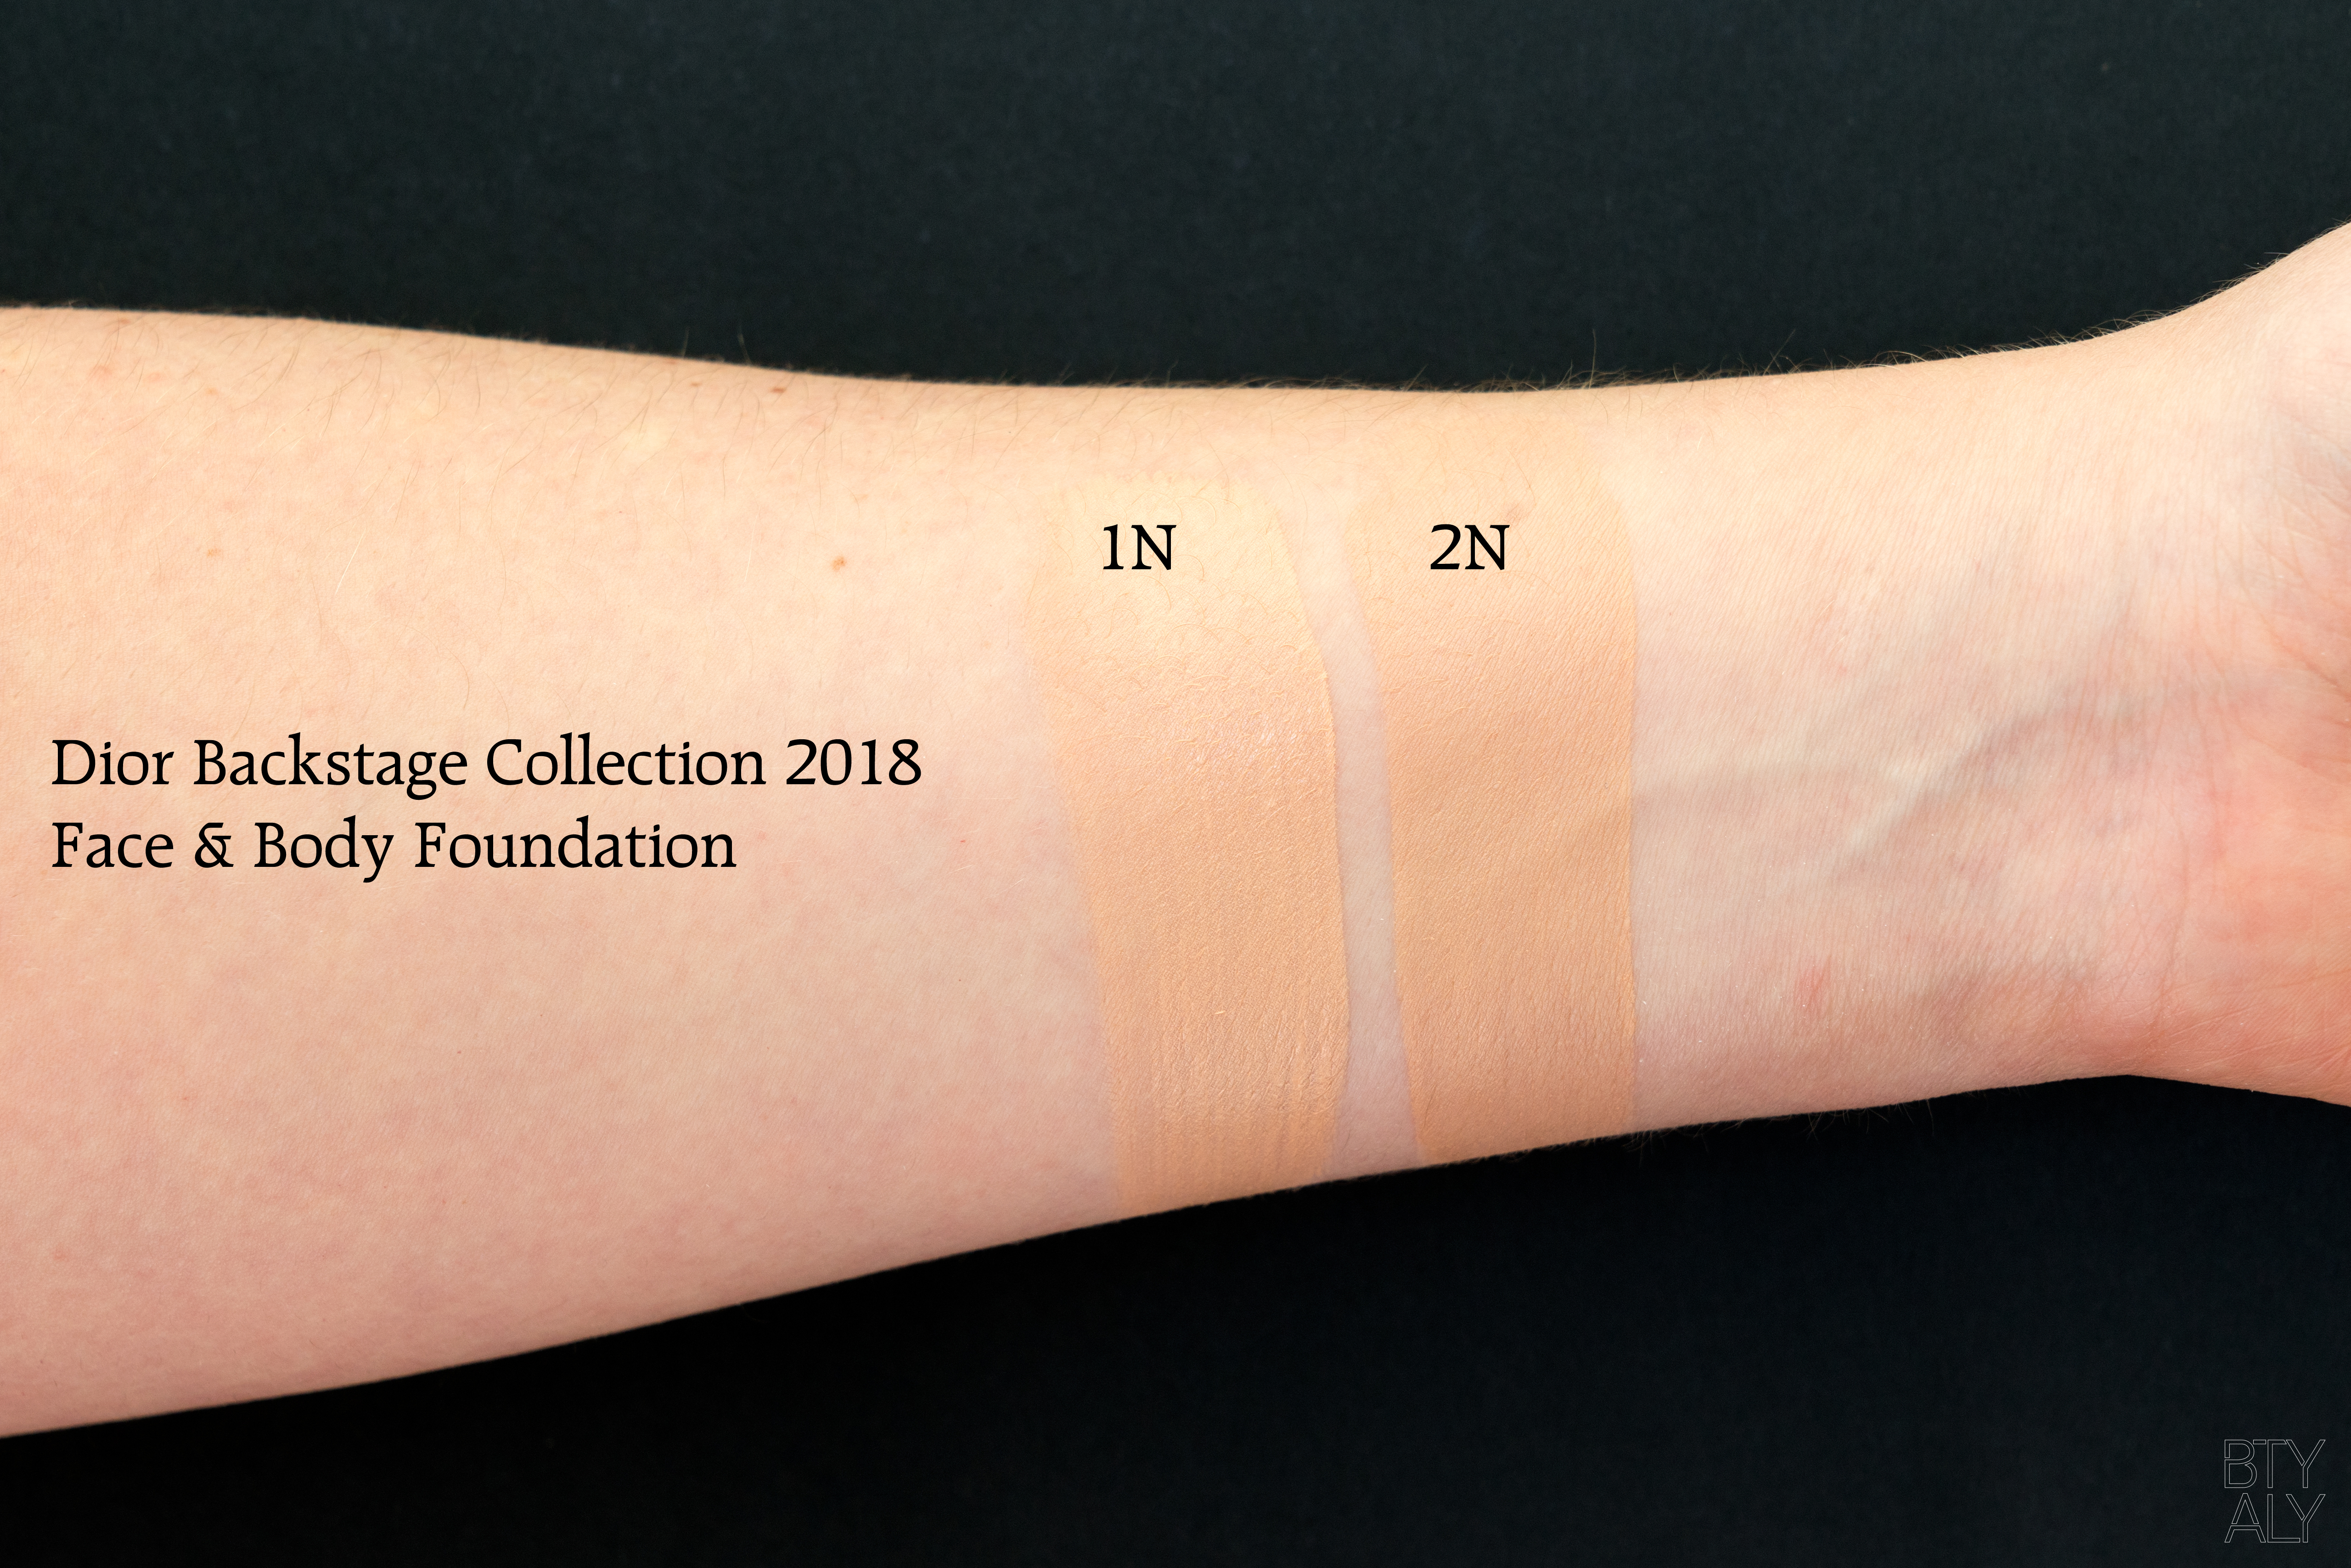 dior backstage face & body foundation swatches